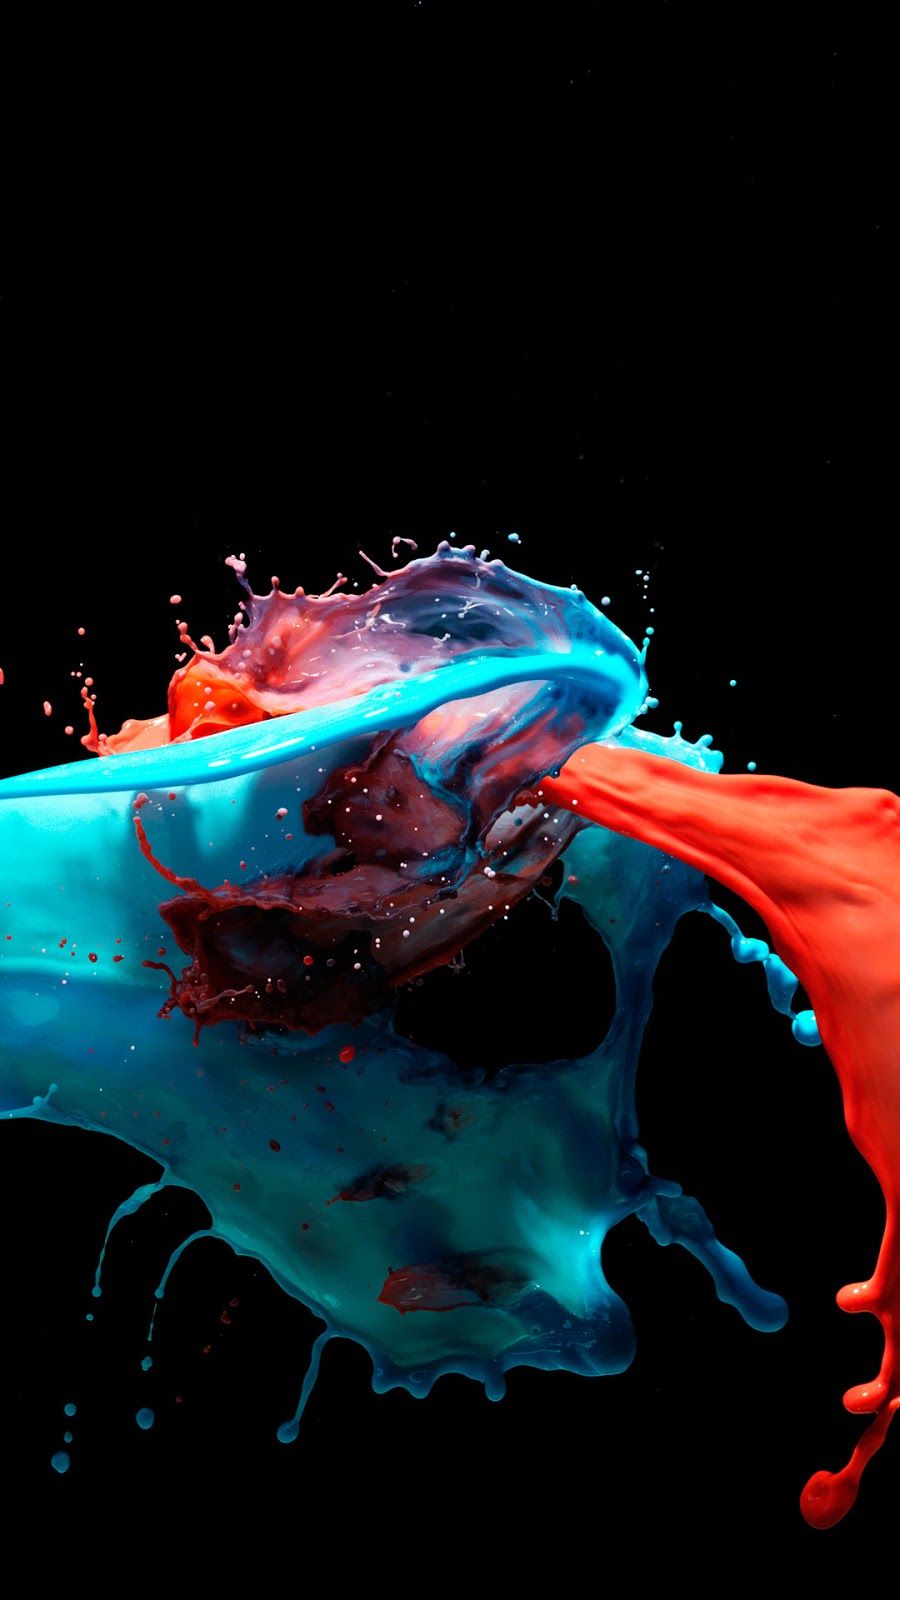 Android Image Wallpaper 3D Paint Splash Red Blue Mixing. The Best Android Wallpaper Free Download